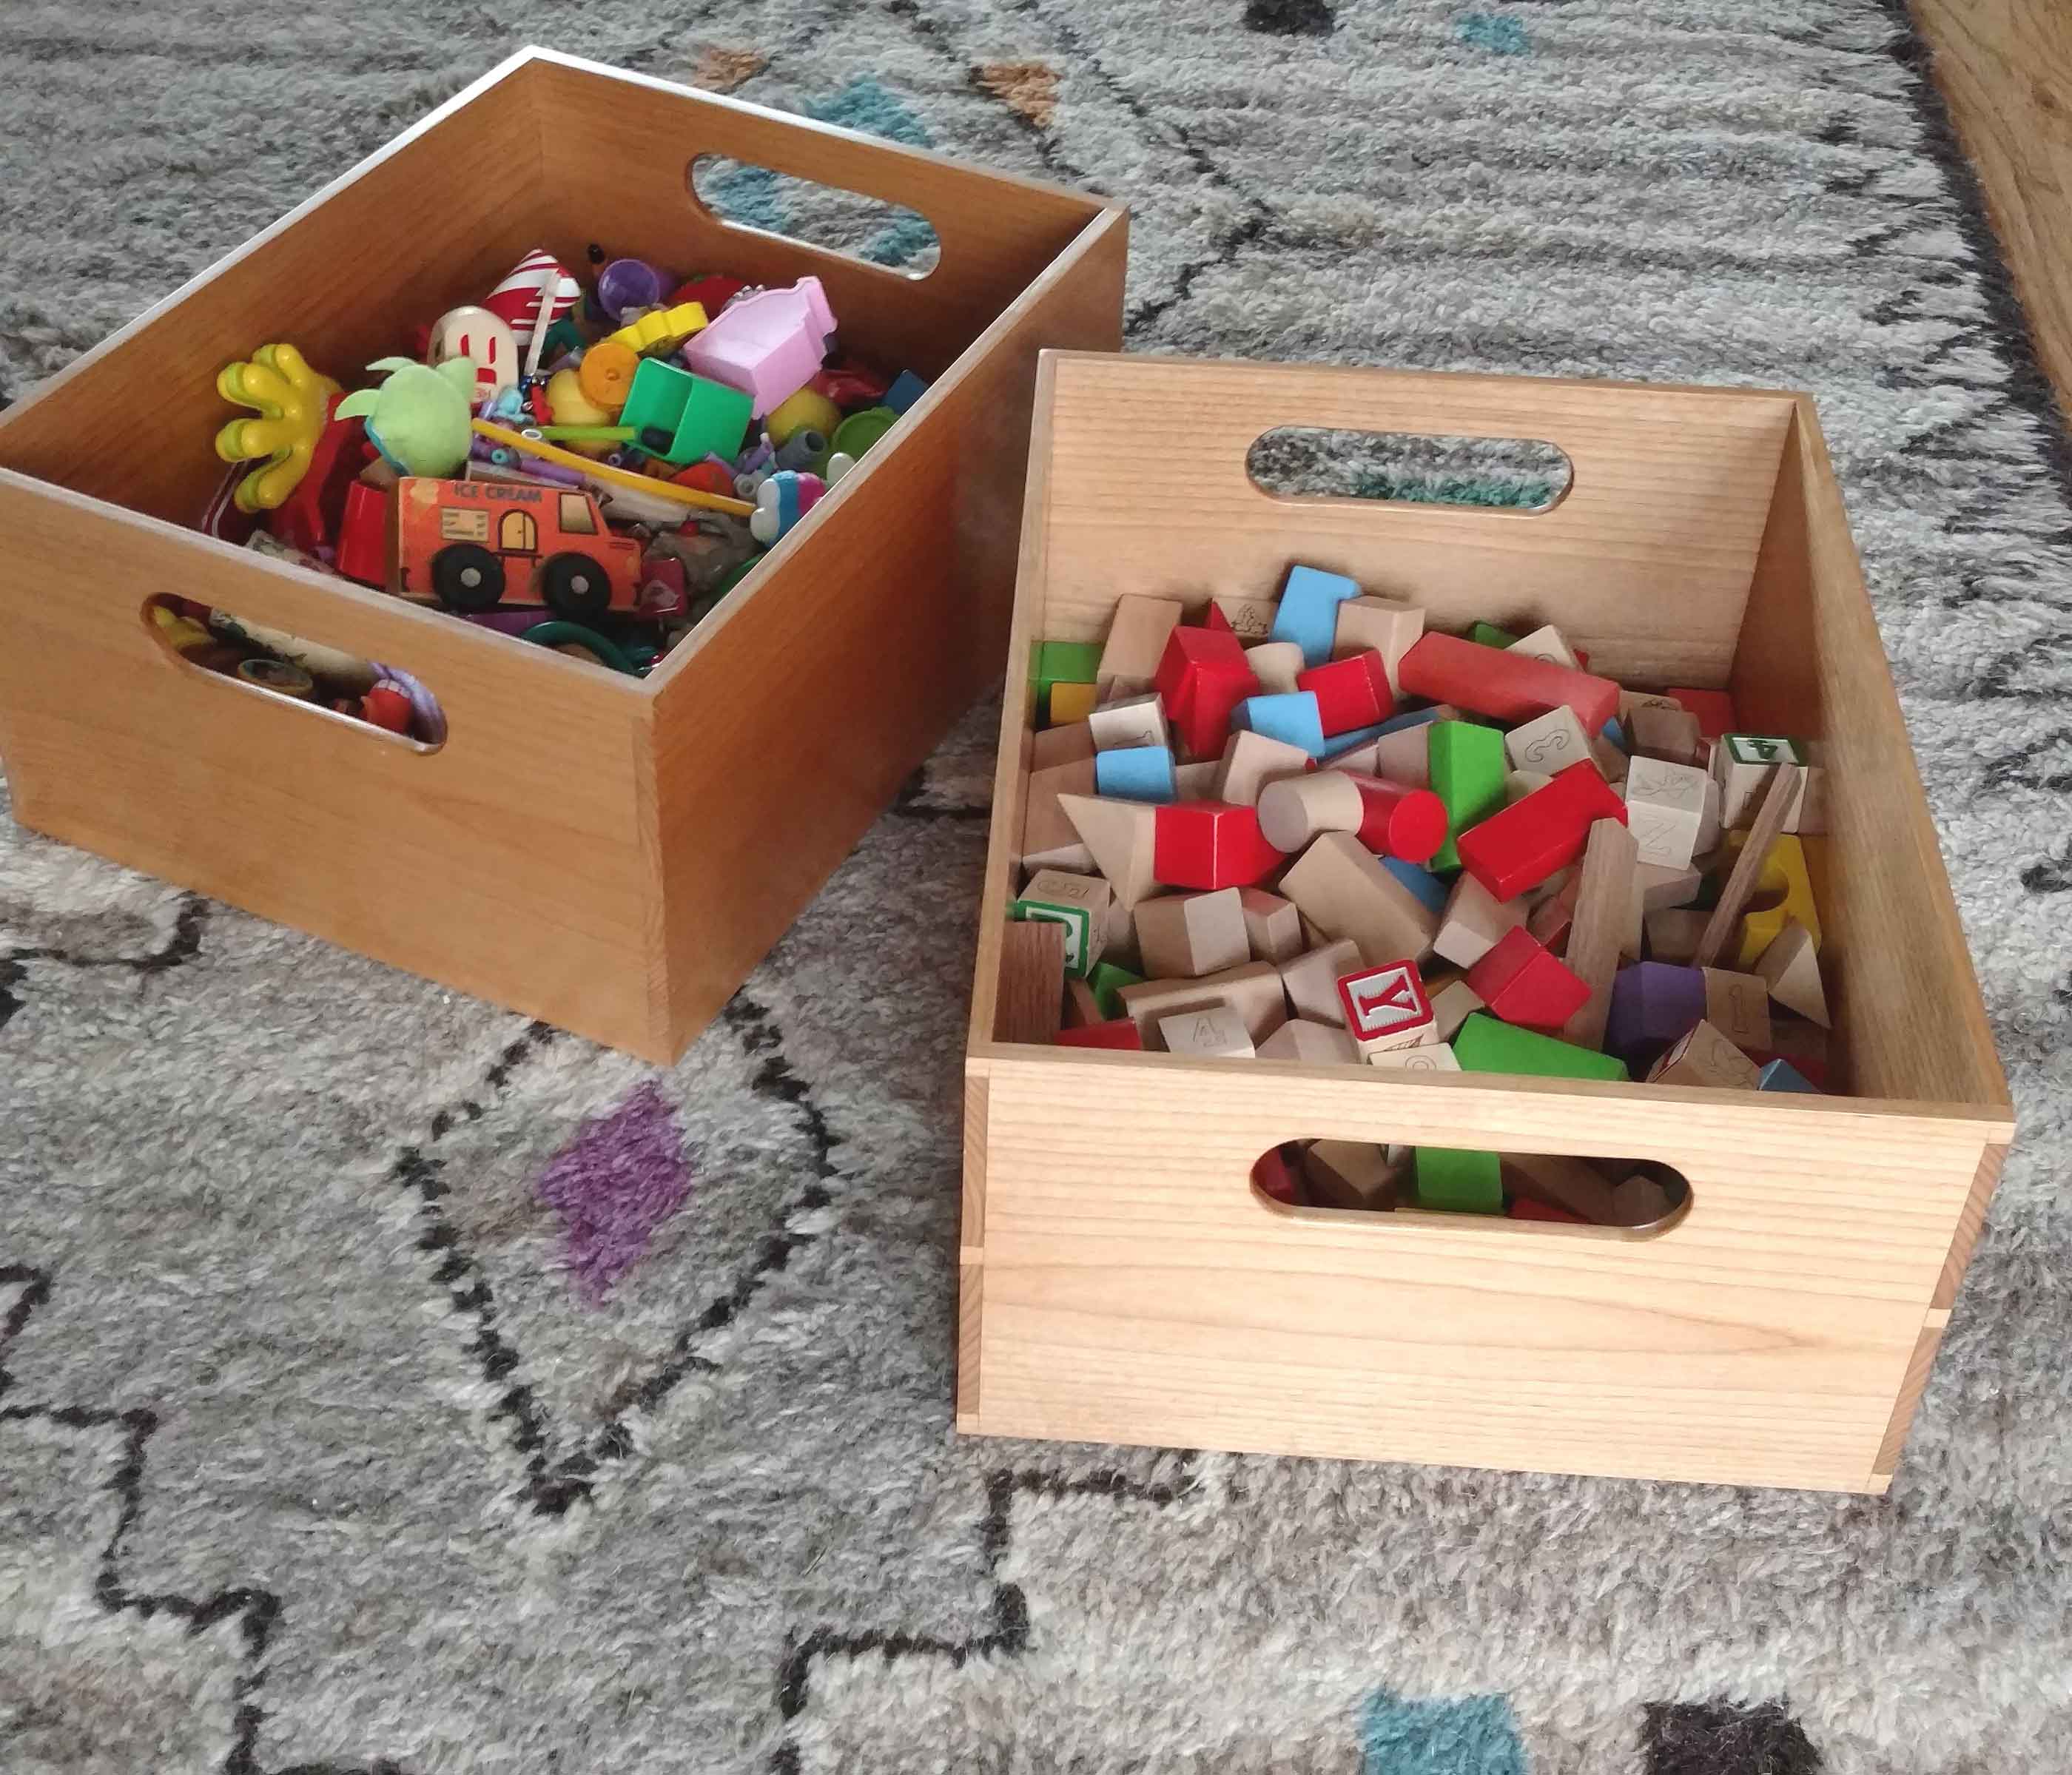 finished boxes with toys inside